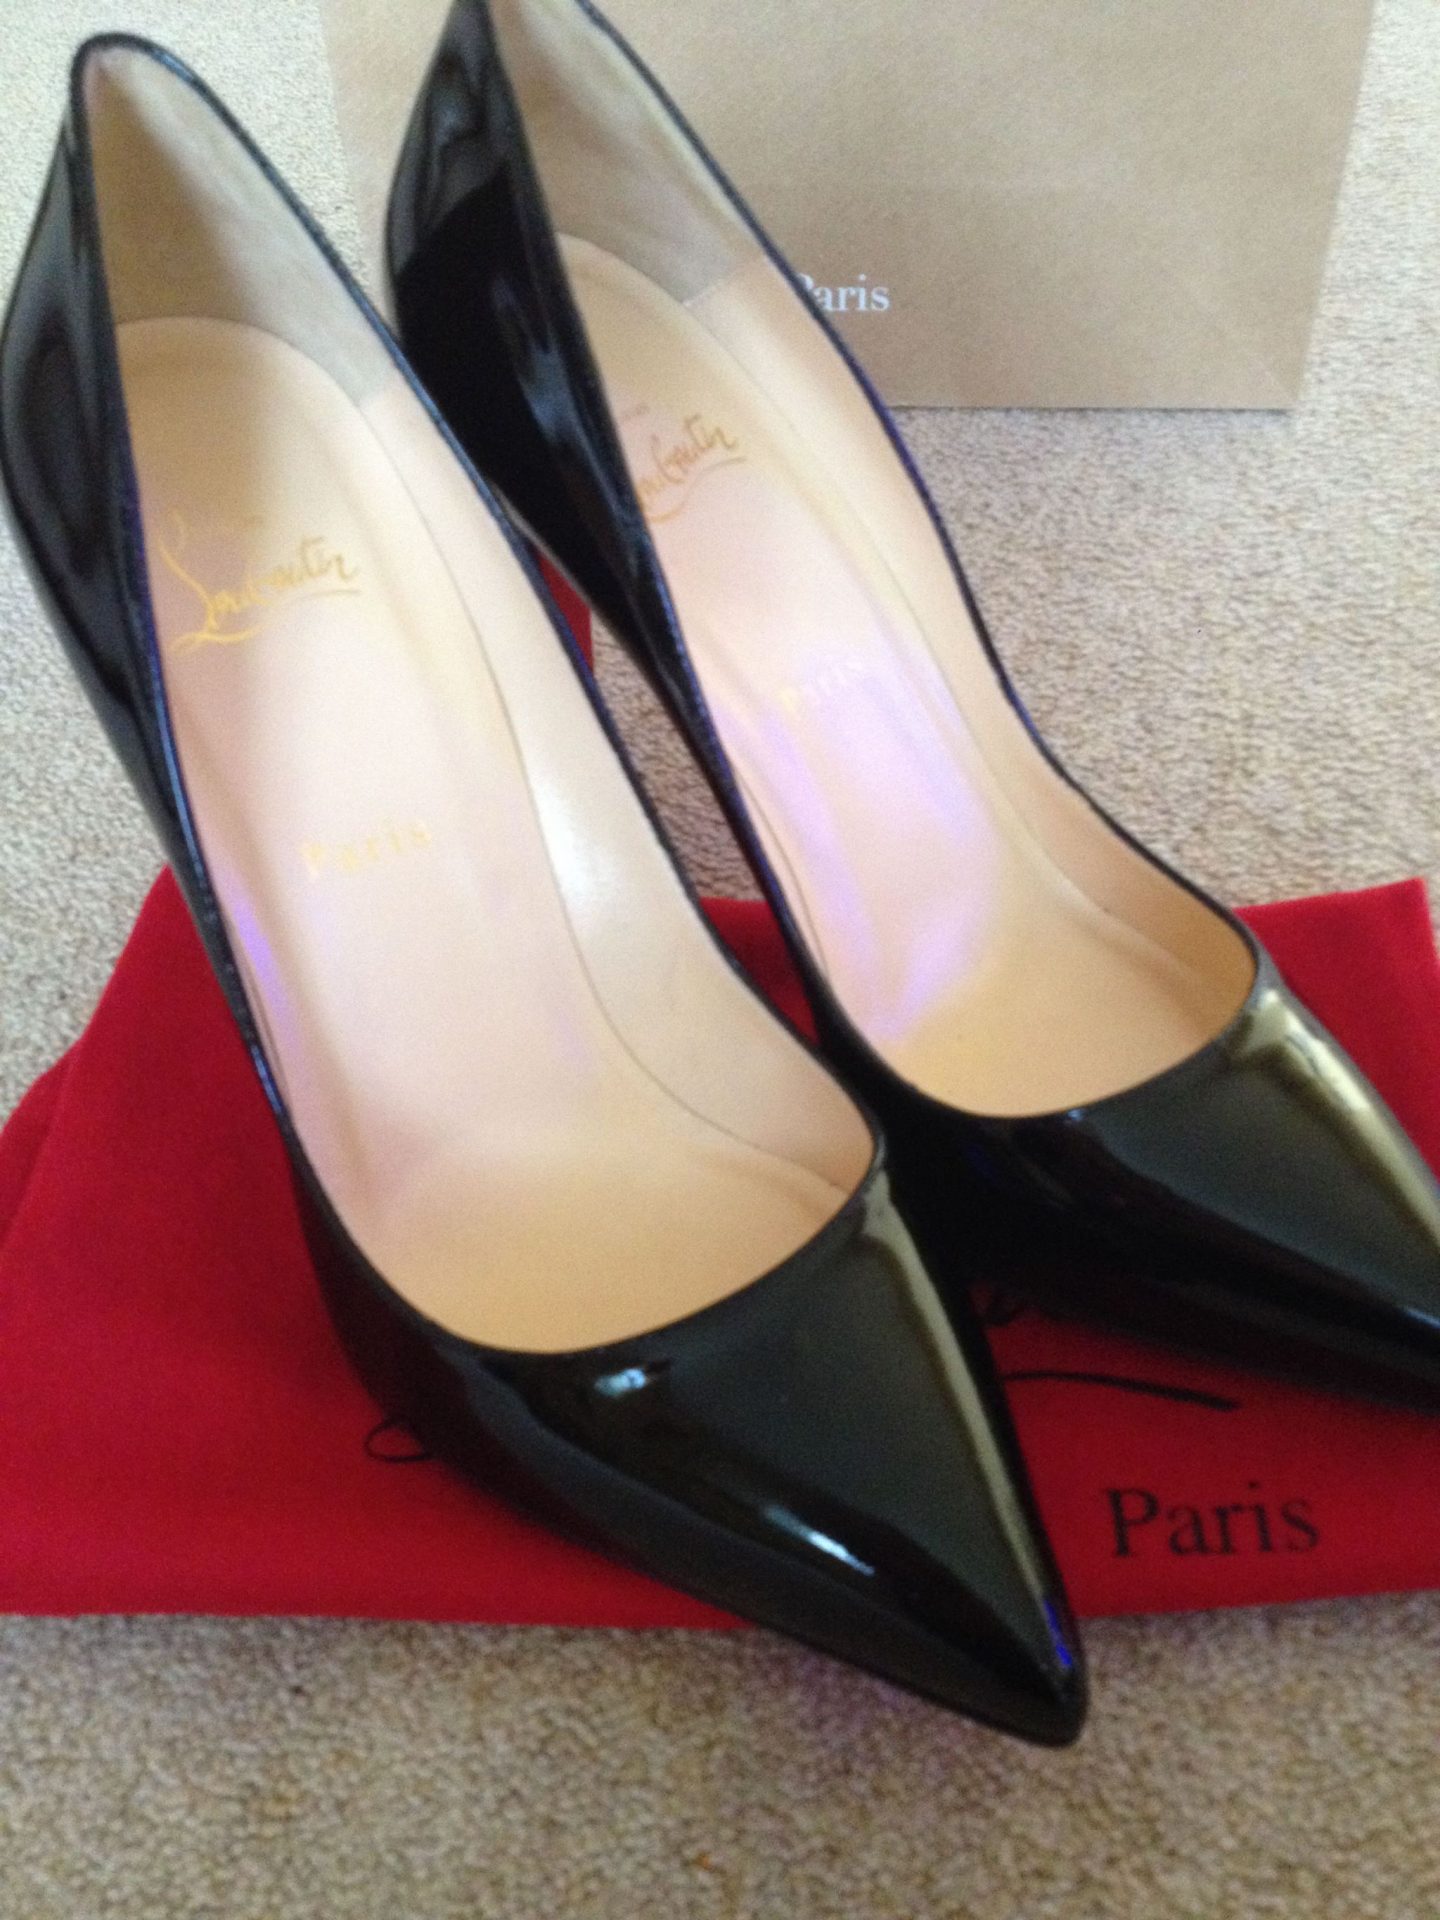 Buying Louboutins: Pigalle 100